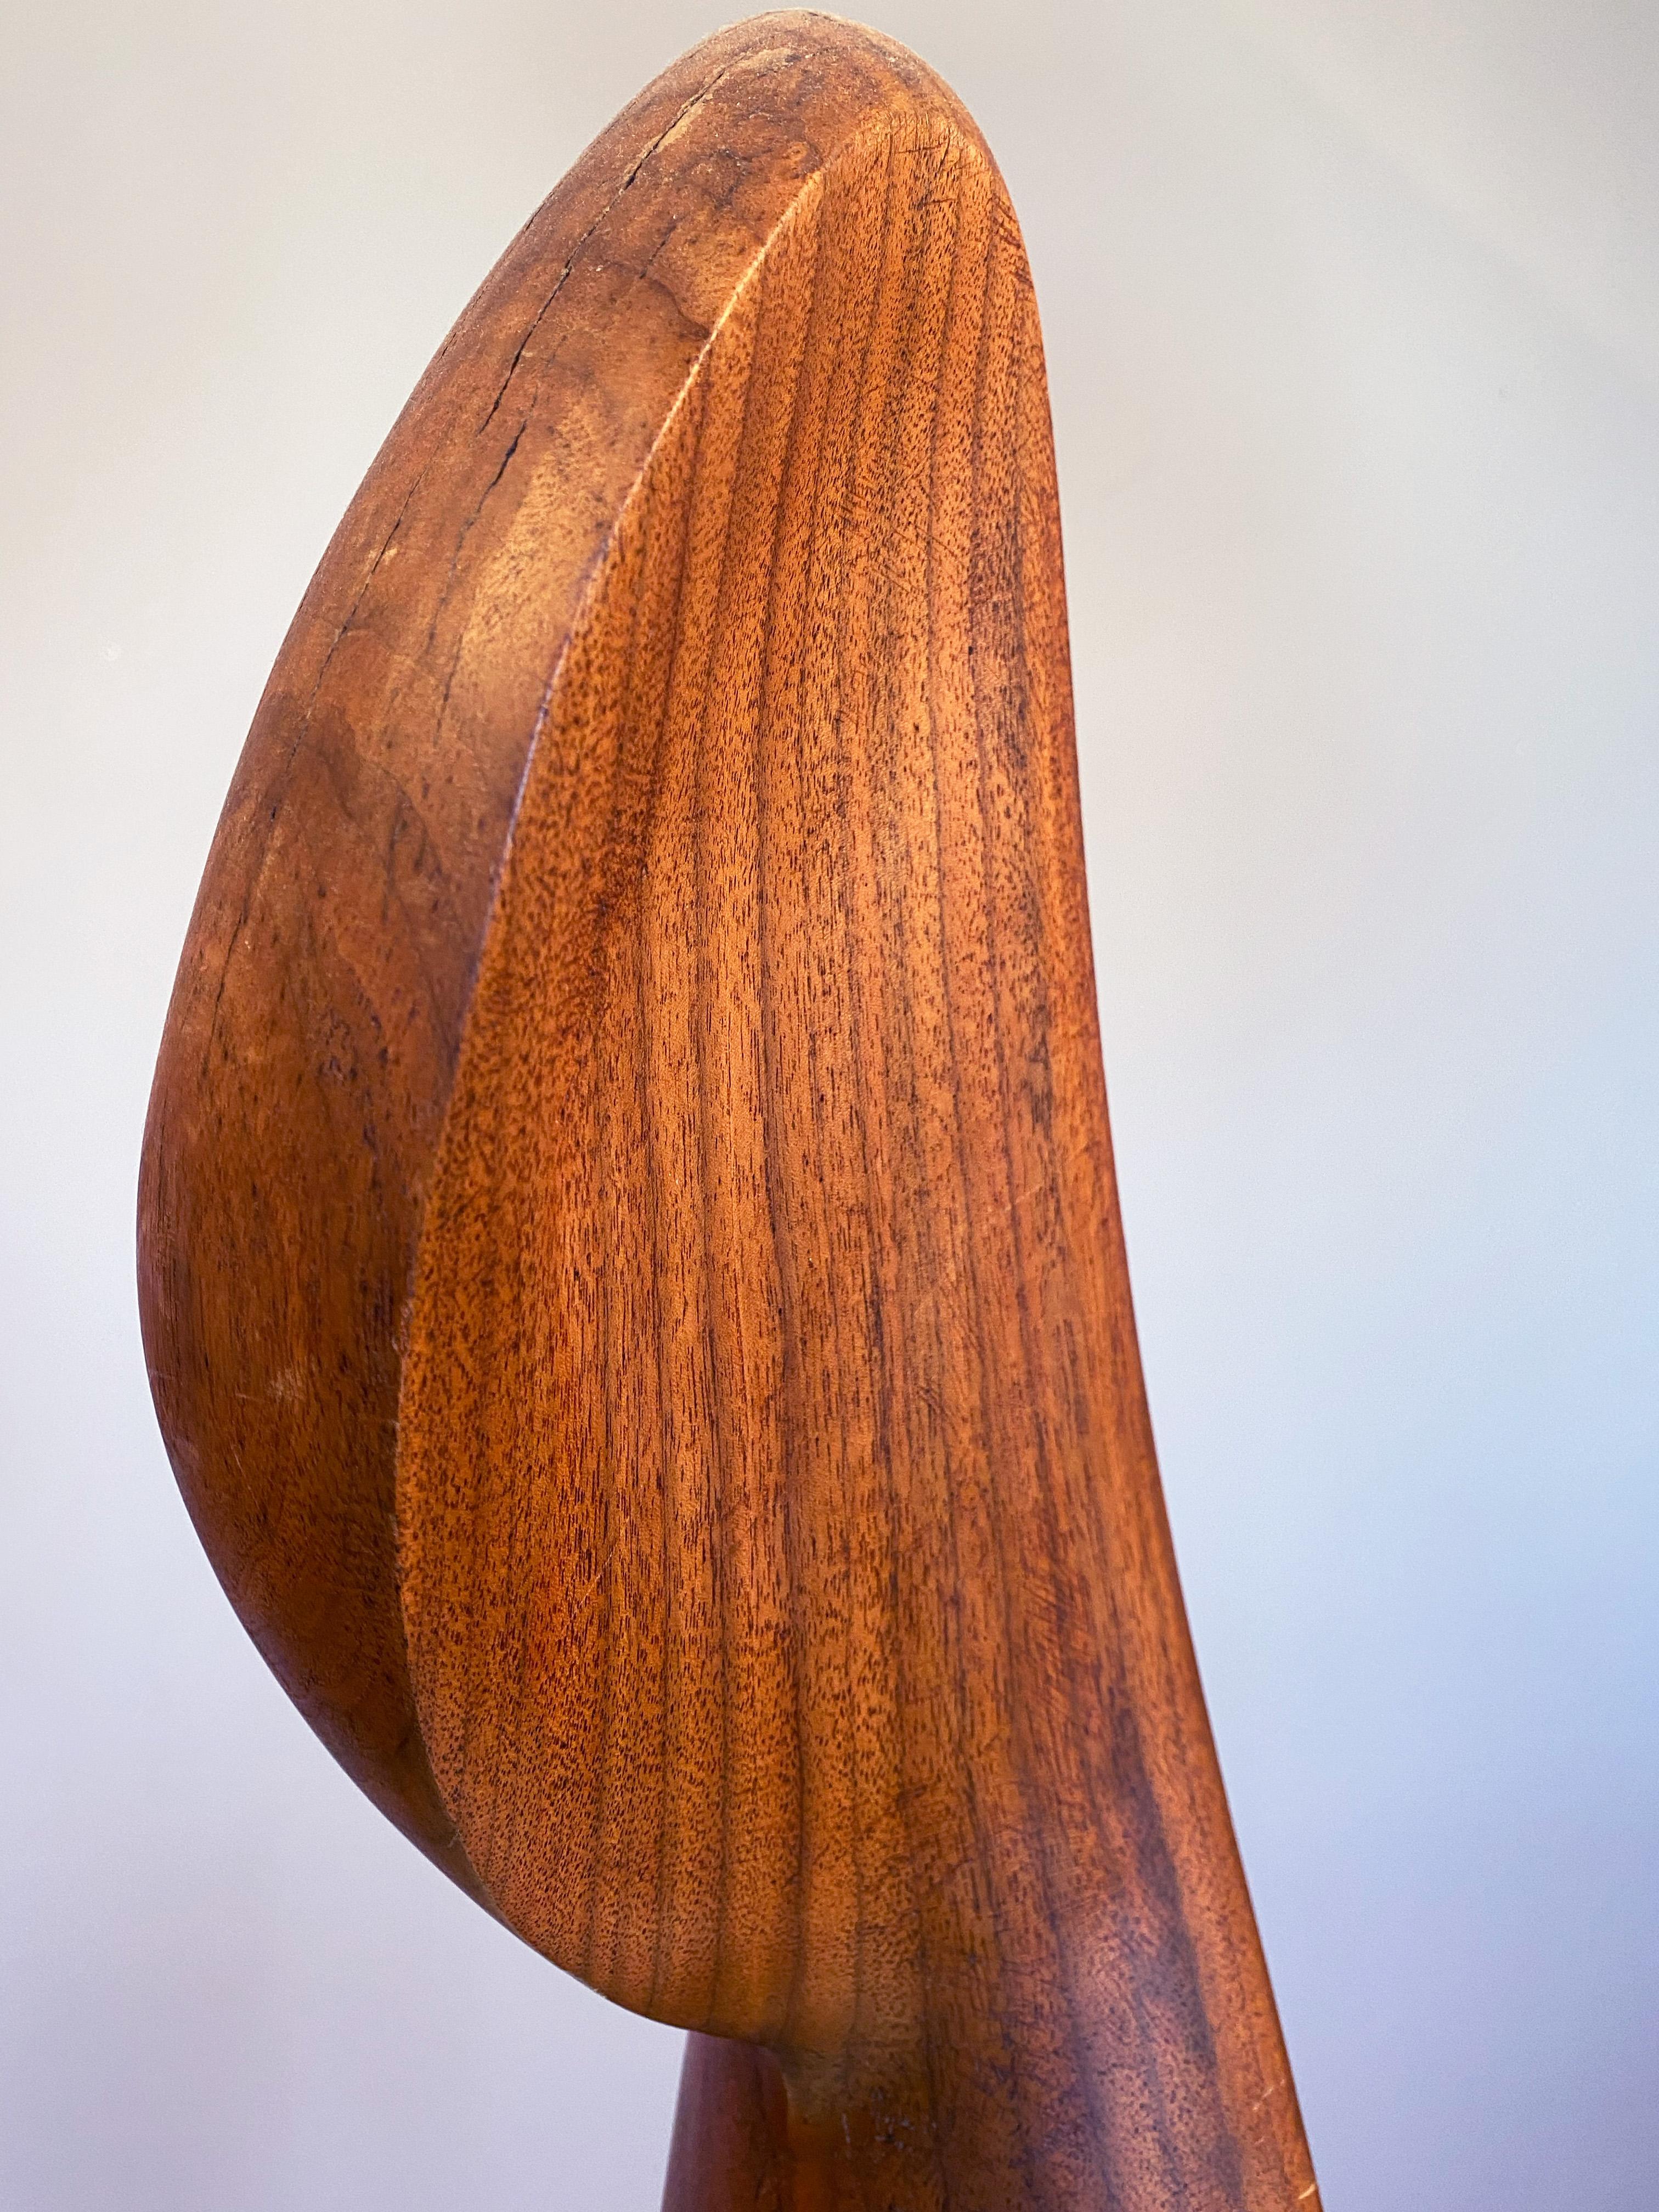 Joseph Goethe was one of America's finest early modernist carvers in wood.  He experimented with exotic woods often collected in his native California and from other countries.  This form is a non-objective work yet Goethe referred to it as a 